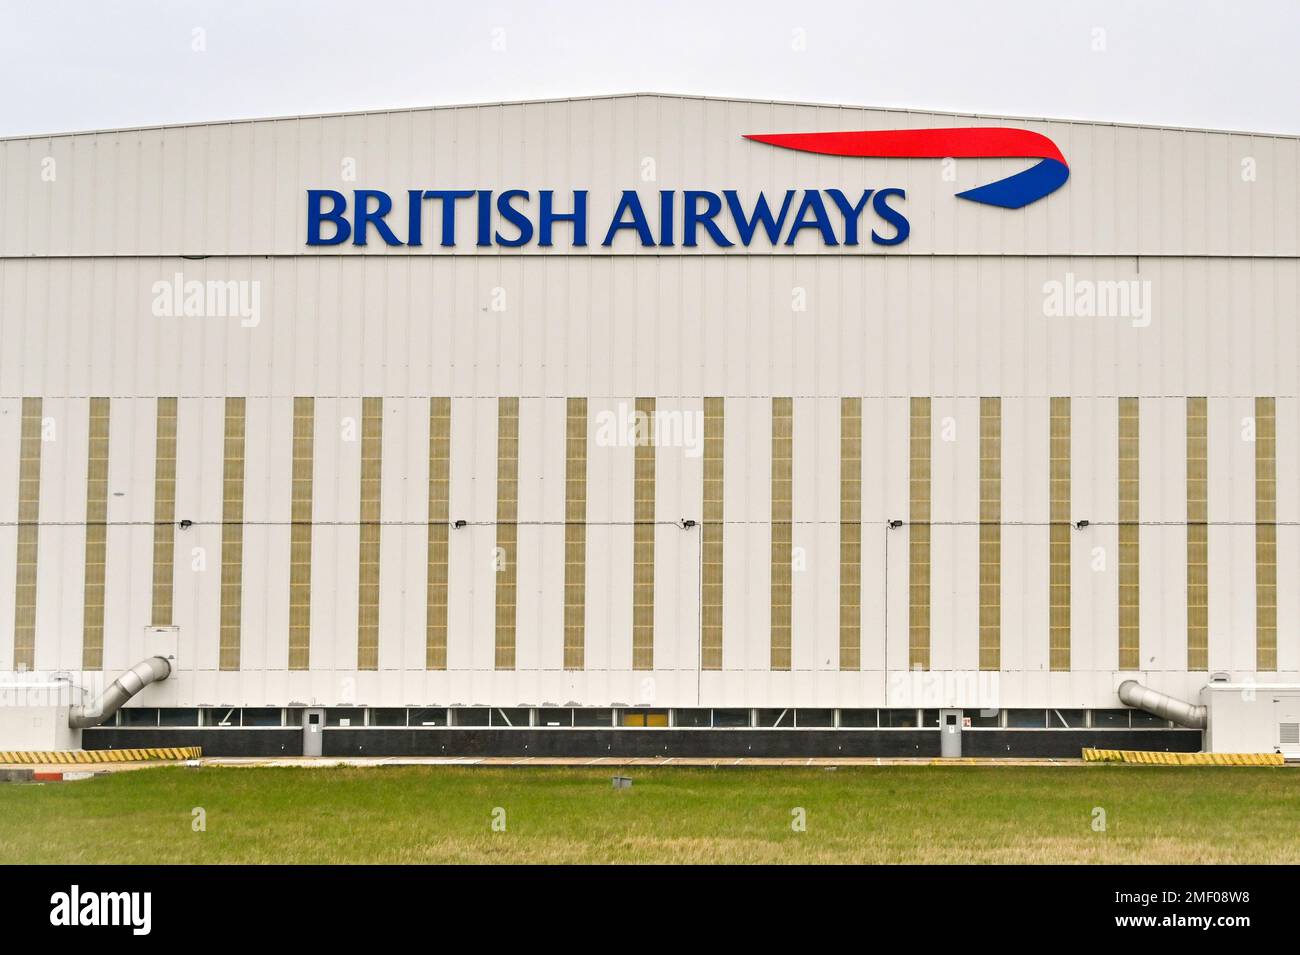 London, England - April 2022: Exterior view of a large aircraft maintenance hangar at Heathrow Airport used by British Airways Stock Photo